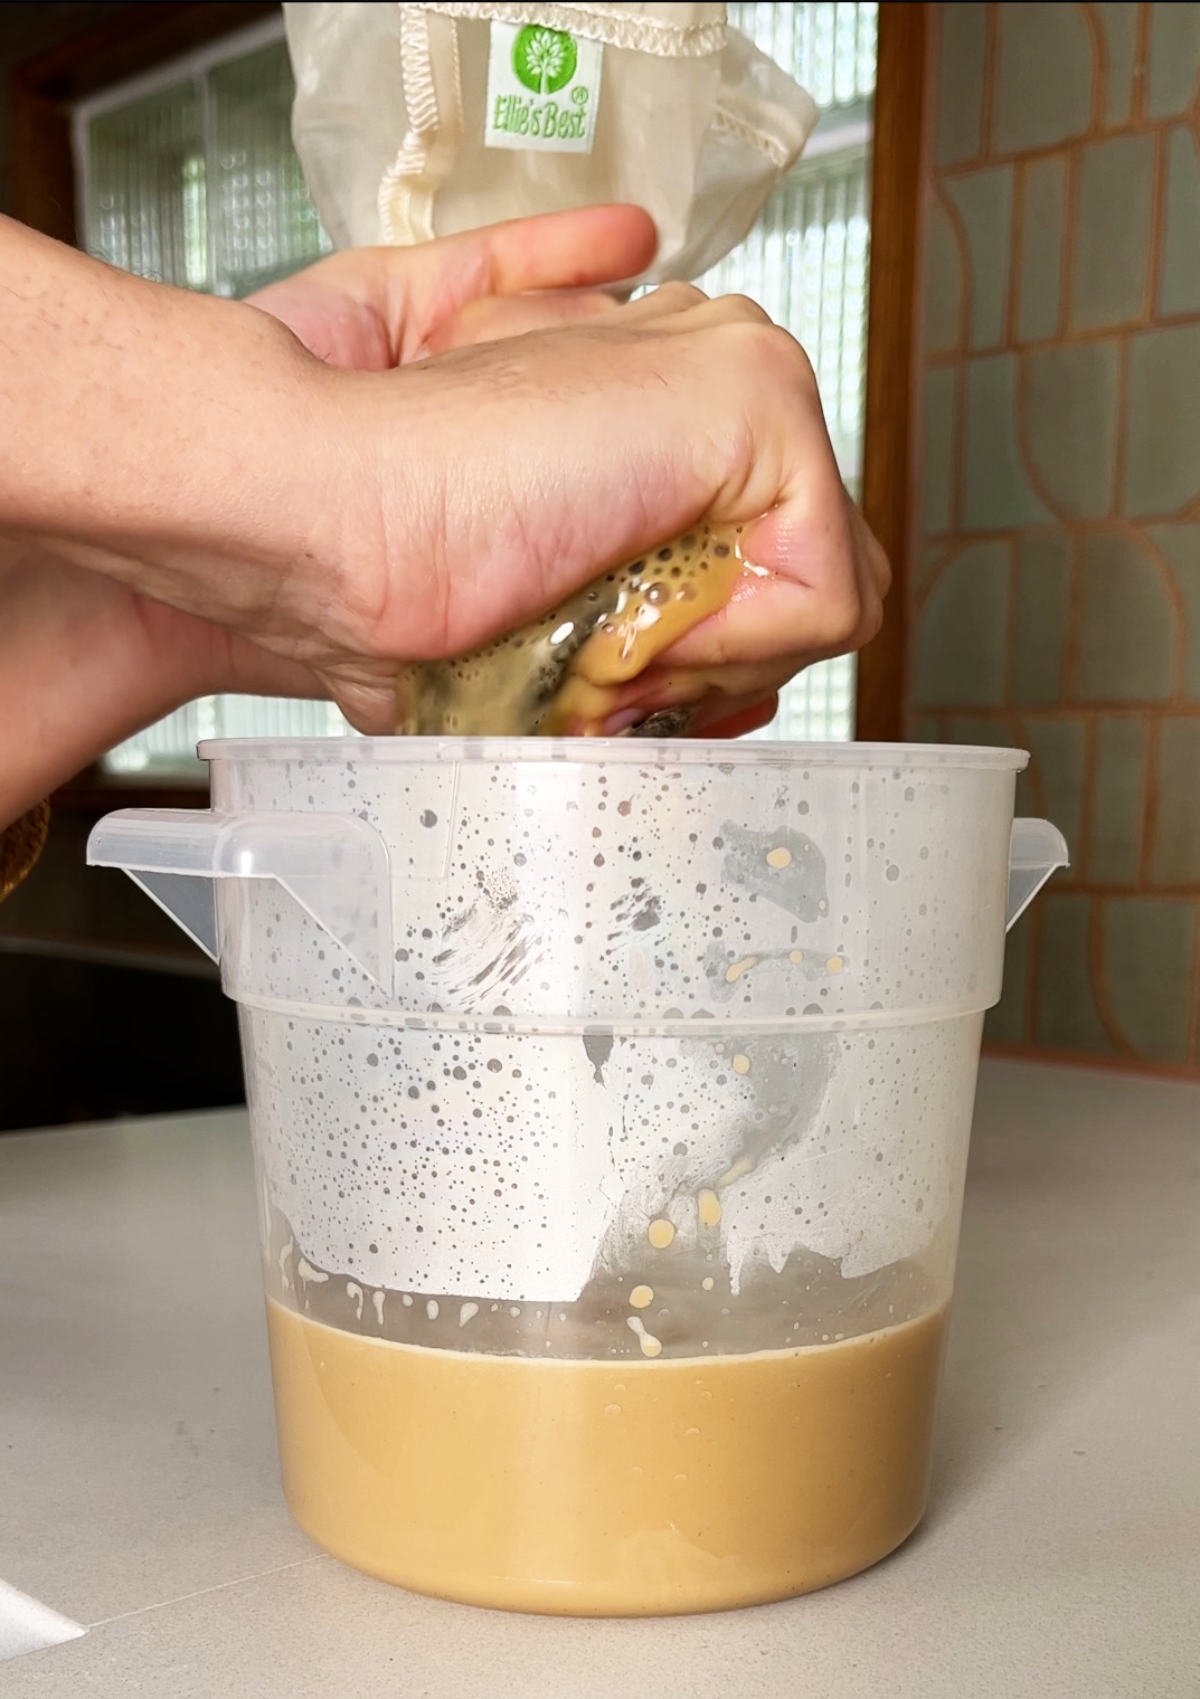 Squeezing liquid out of a nut milk bag into a plastic container.